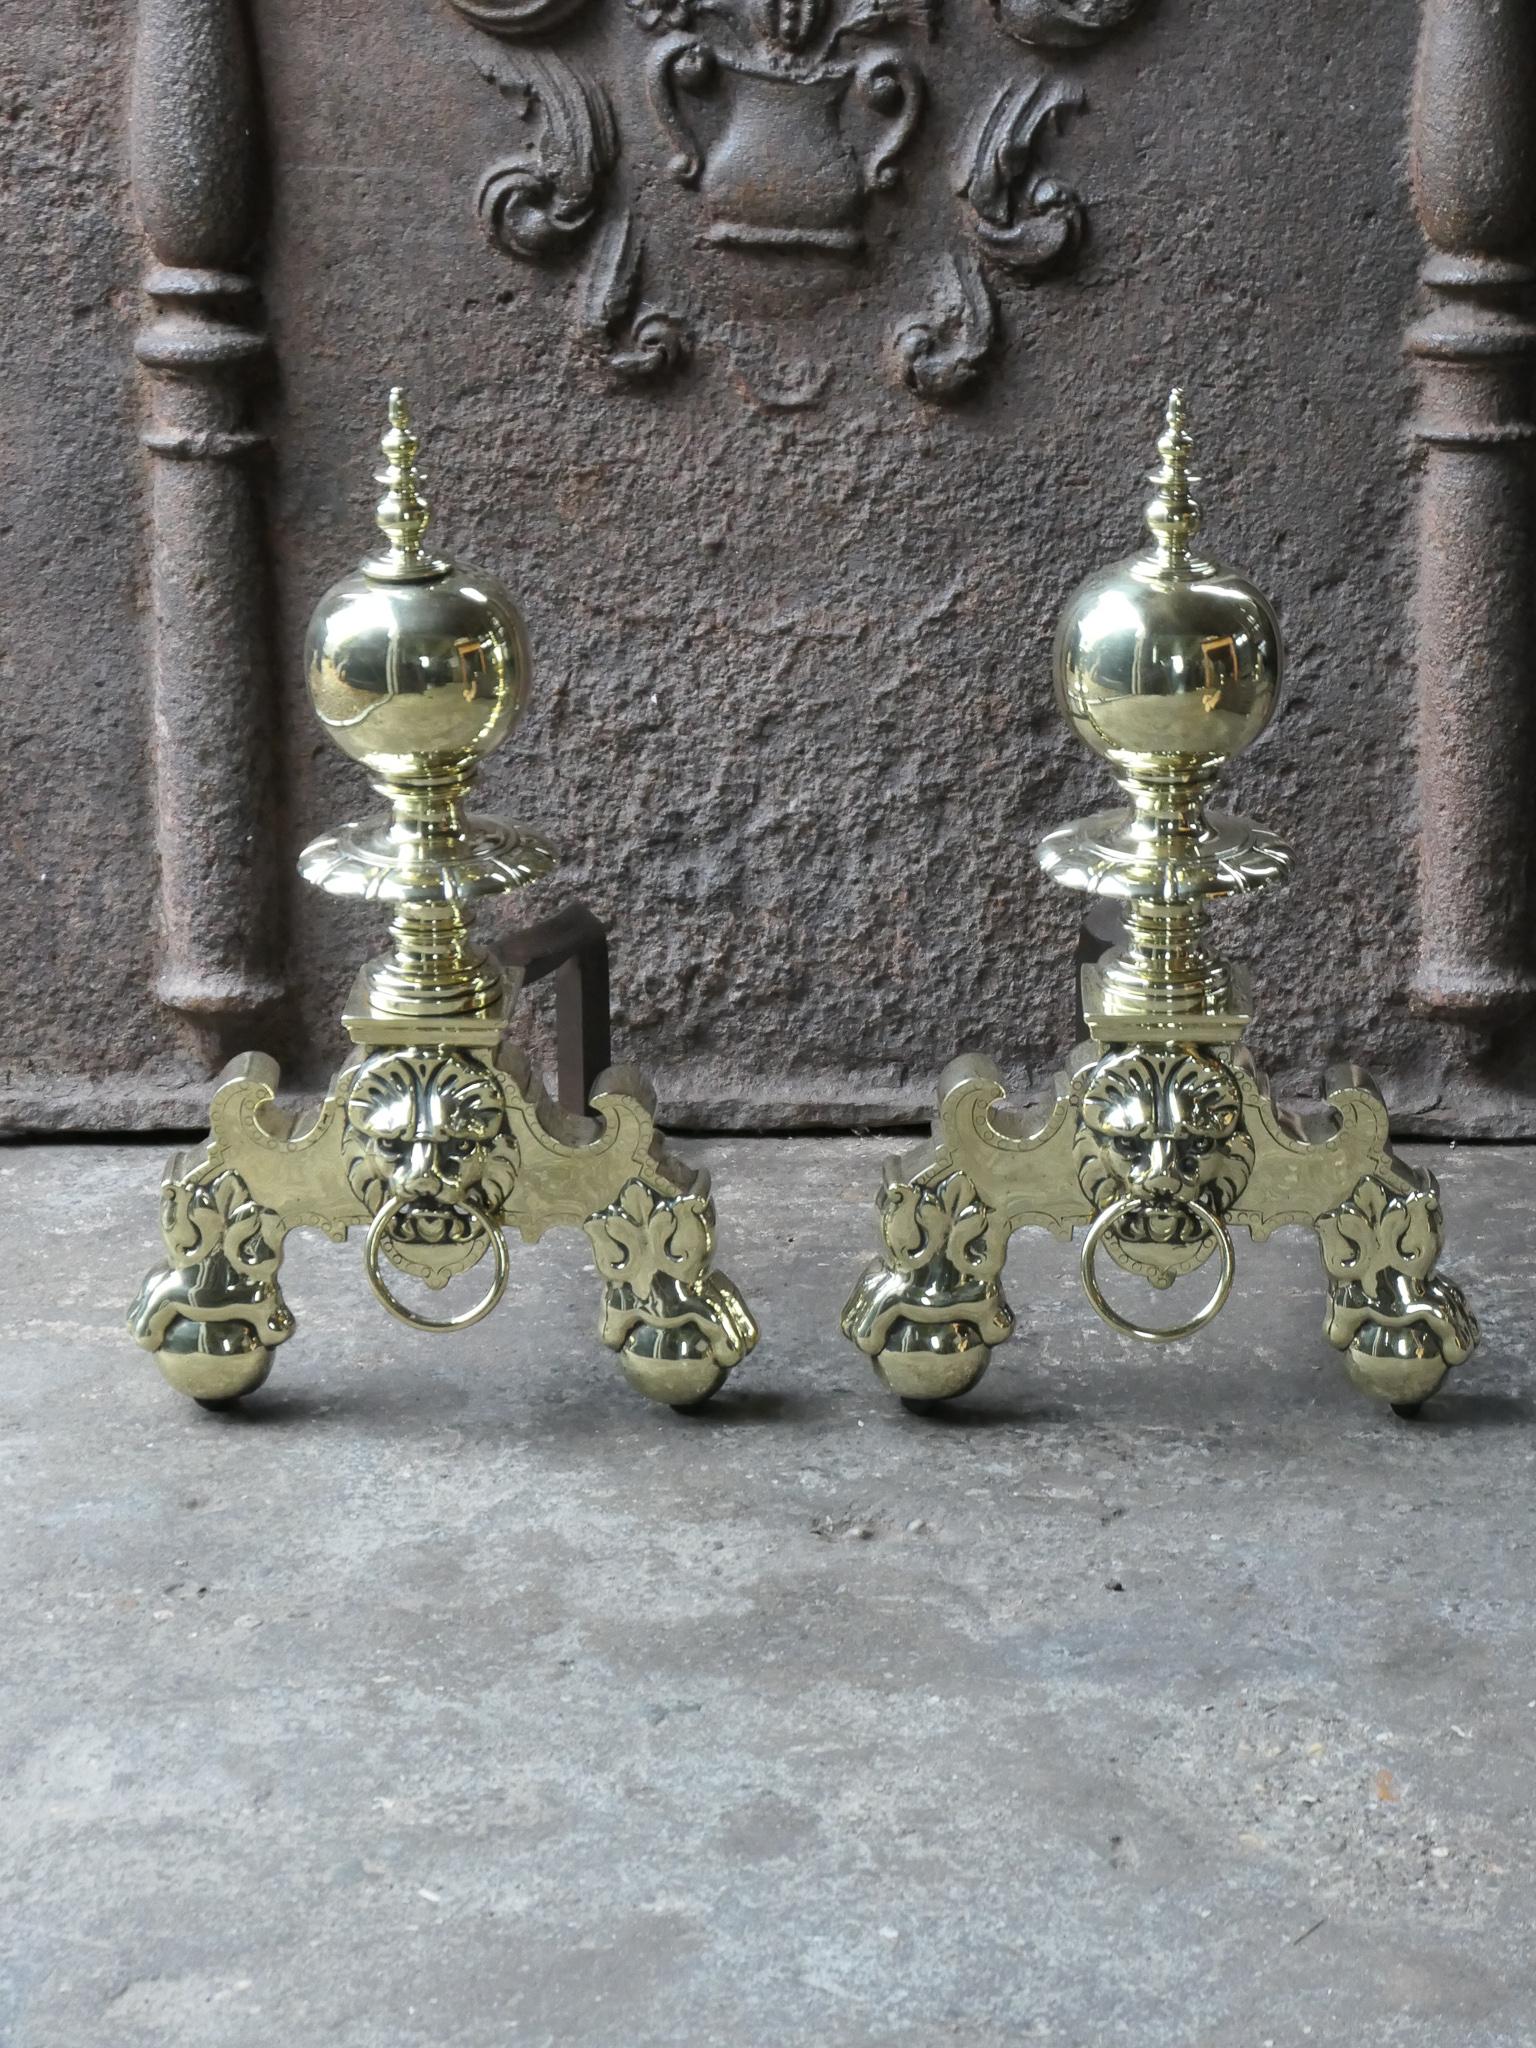 19th century French Louis XIV style andirons made of polished brass and wrought iron. The condition is good. The andirons are fit for use in the fireplace.







